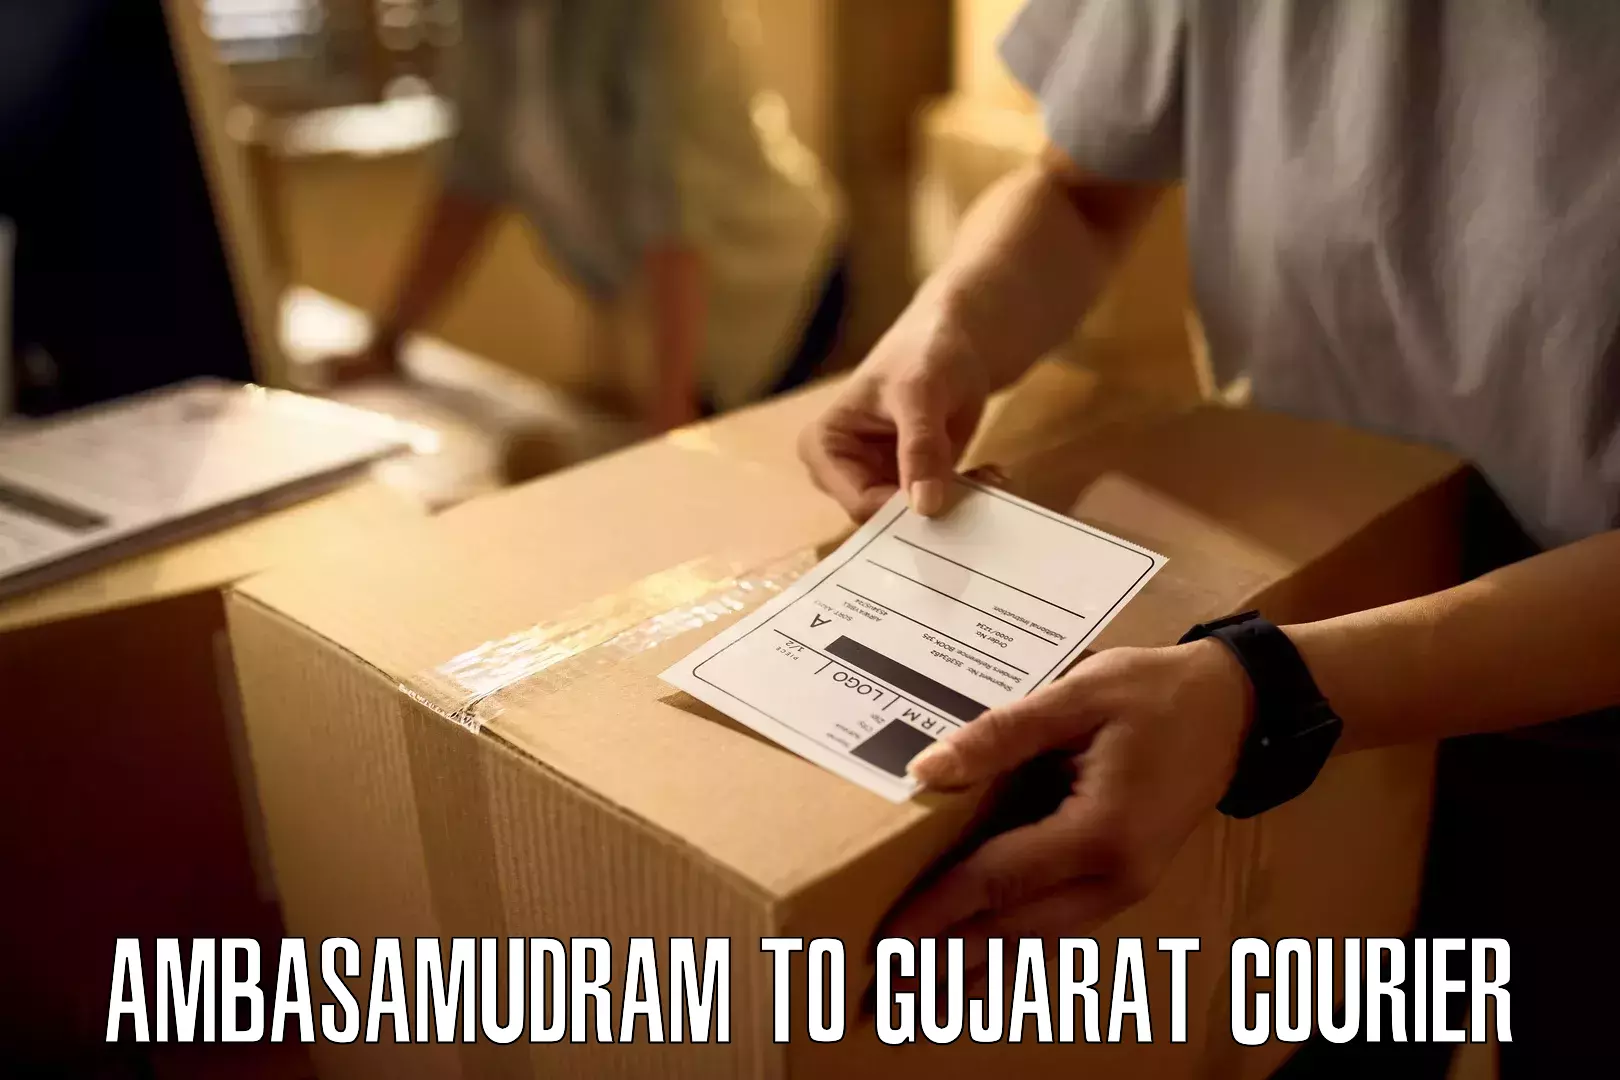 State-of-the-art courier technology Ambasamudram to Ahmedabad